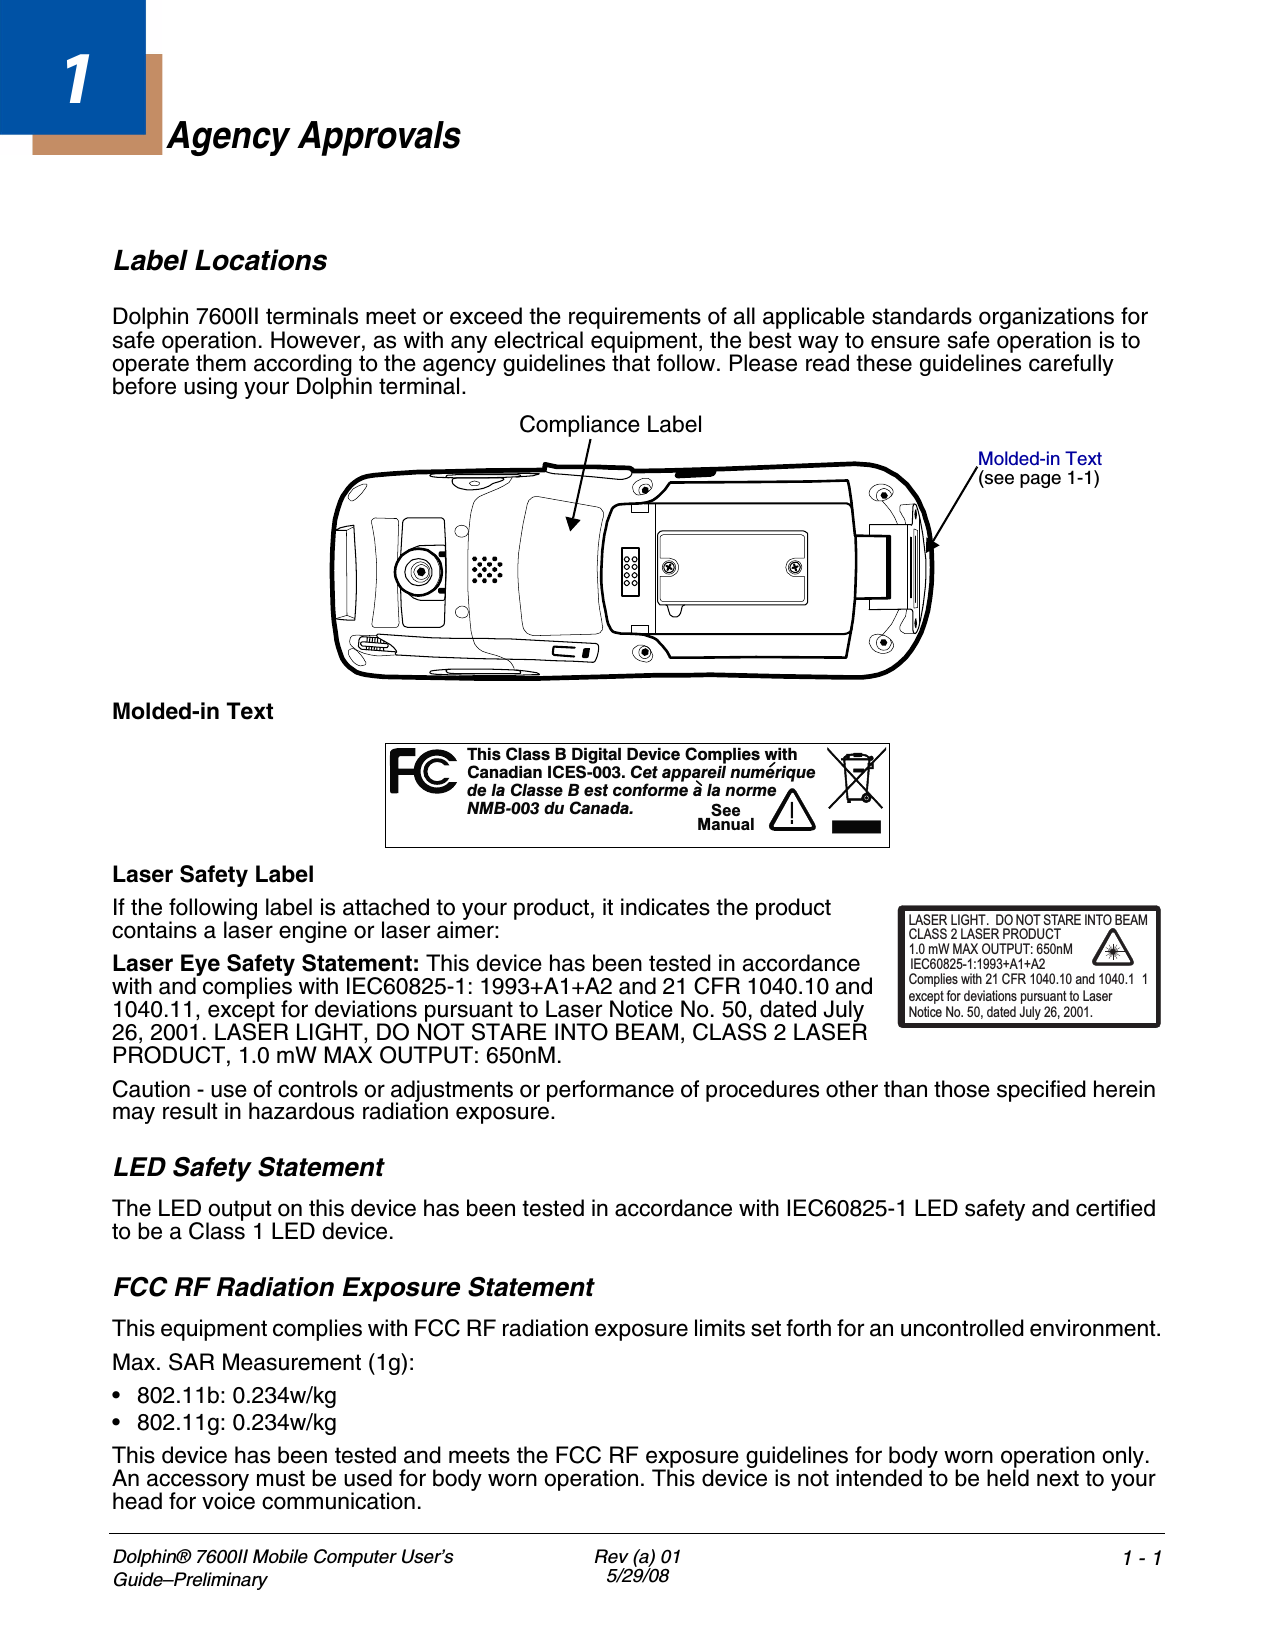 Dolphin® 7600II Mobile Computer User’s Guide–PreliminaryRev (a) 015/29/08 1 - 11Agency ApprovalsLabel LocationsDolphin 7600II terminals meet or exceed the requirements of all applicable standards organizations for safe operation. However, as with any electrical equipment, the best way to ensure safe operation is to operate them according to the agency guidelines that follow. Please read these guidelines carefully before using your Dolphin terminal. Molded-in TextLaser Safety LabelIf the following label is attached to your product, it indicates the product contains a laser engine or laser aimer: Laser Eye Safety Statement: This device has been tested in accordance with and complies with IEC60825-1: 1993+A1+A2 and 21 CFR 1040.10 and 1040.11, except for deviations pursuant to Laser Notice No. 50, dated July 26, 2001. LASER LIGHT, DO NOT STARE INTO BEAM, CLASS 2 LASER PRODUCT, 1.0 mW MAX OUTPUT: 650nM. Caution - use of controls or adjustments or performance of procedures other than those specified herein may result in hazardous radiation exposure.LED Safety StatementThe LED output on this device has been tested in accordance with IEC60825-1 LED safety and certified to be a Class 1 LED device.FCC RF Radiation Exposure StatementThis equipment complies with FCC RF radiation exposure limits set forth for an uncontrolled environment.Max. SAR Measurement (1g):• 802.11b: 0.234w/kg • 802.11g: 0.234w/kg This device has been tested and meets the FCC RF exposure guidelines for body worn operation only. An accessory must be used for body worn operation. This device is not intended to be held next to your head for voice communication.Compliance LabelMolded-in Text (see page 1-1)hs a s i t D c Cm i tTiCl s B D gi al evi e o pl es wi hCndiI -00 eaai muaa anCES3.Ct pprelnu eriq ed l C s e B es con e aa ormea lastform l n e00 u n aNMB- 3 dCaad.!SeeManualLASER LIGHT. DO NOT STARE INTO BEAM1.0 mW MAX OUTPUT: 650nMIEC60825-1:1993+A1+A2CLASS 2 LASER PRODUCTComplies with 21 CFR 1040.10 and 1040.1 1except for deviations pursuant to Laser Notice No. 50, dated July 26, 2001.